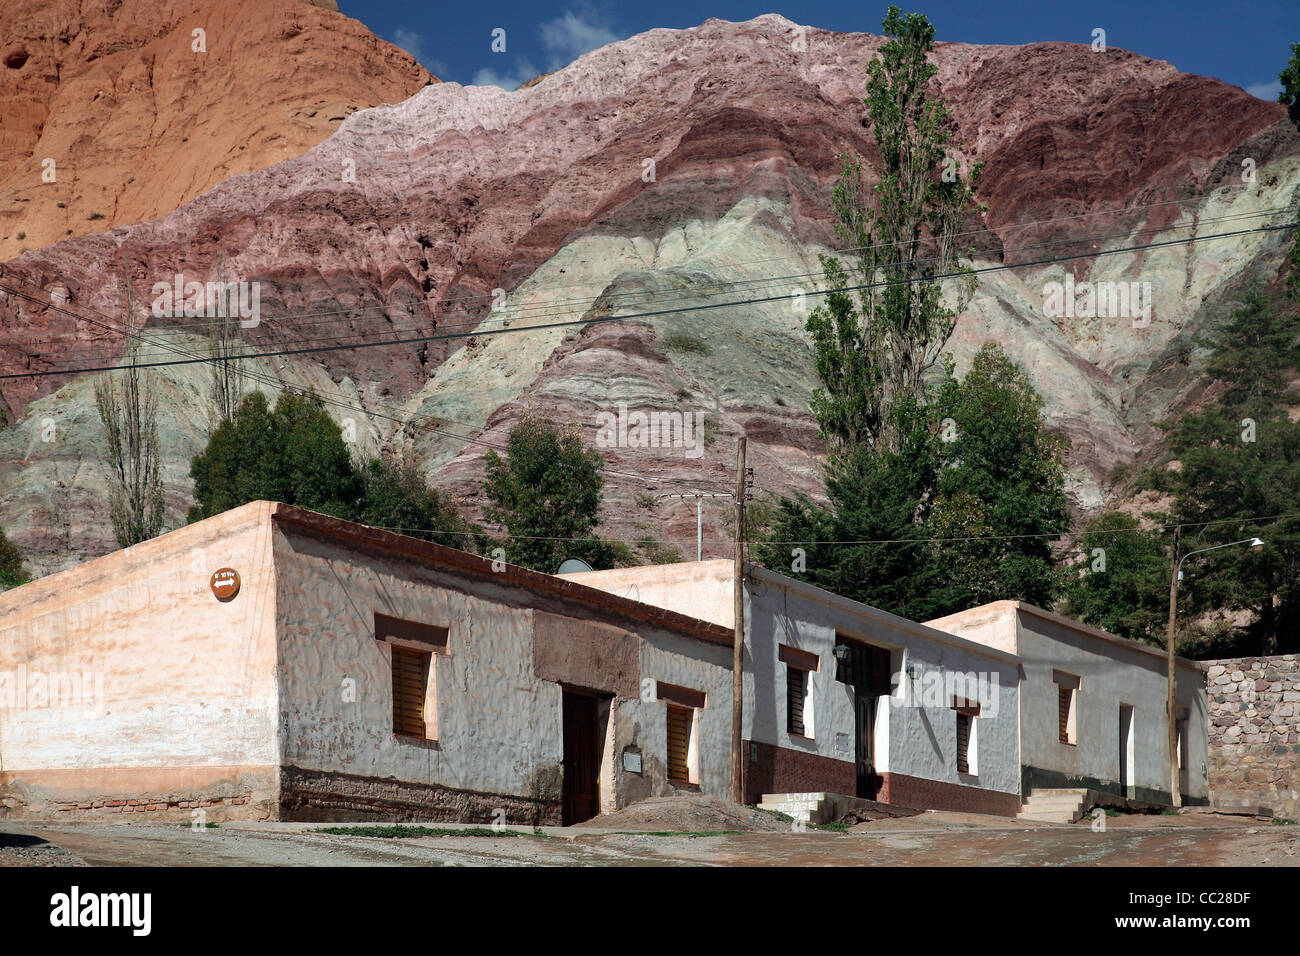 Street in the village Purmamarca, Jujuy province, Argentina Stock Photo